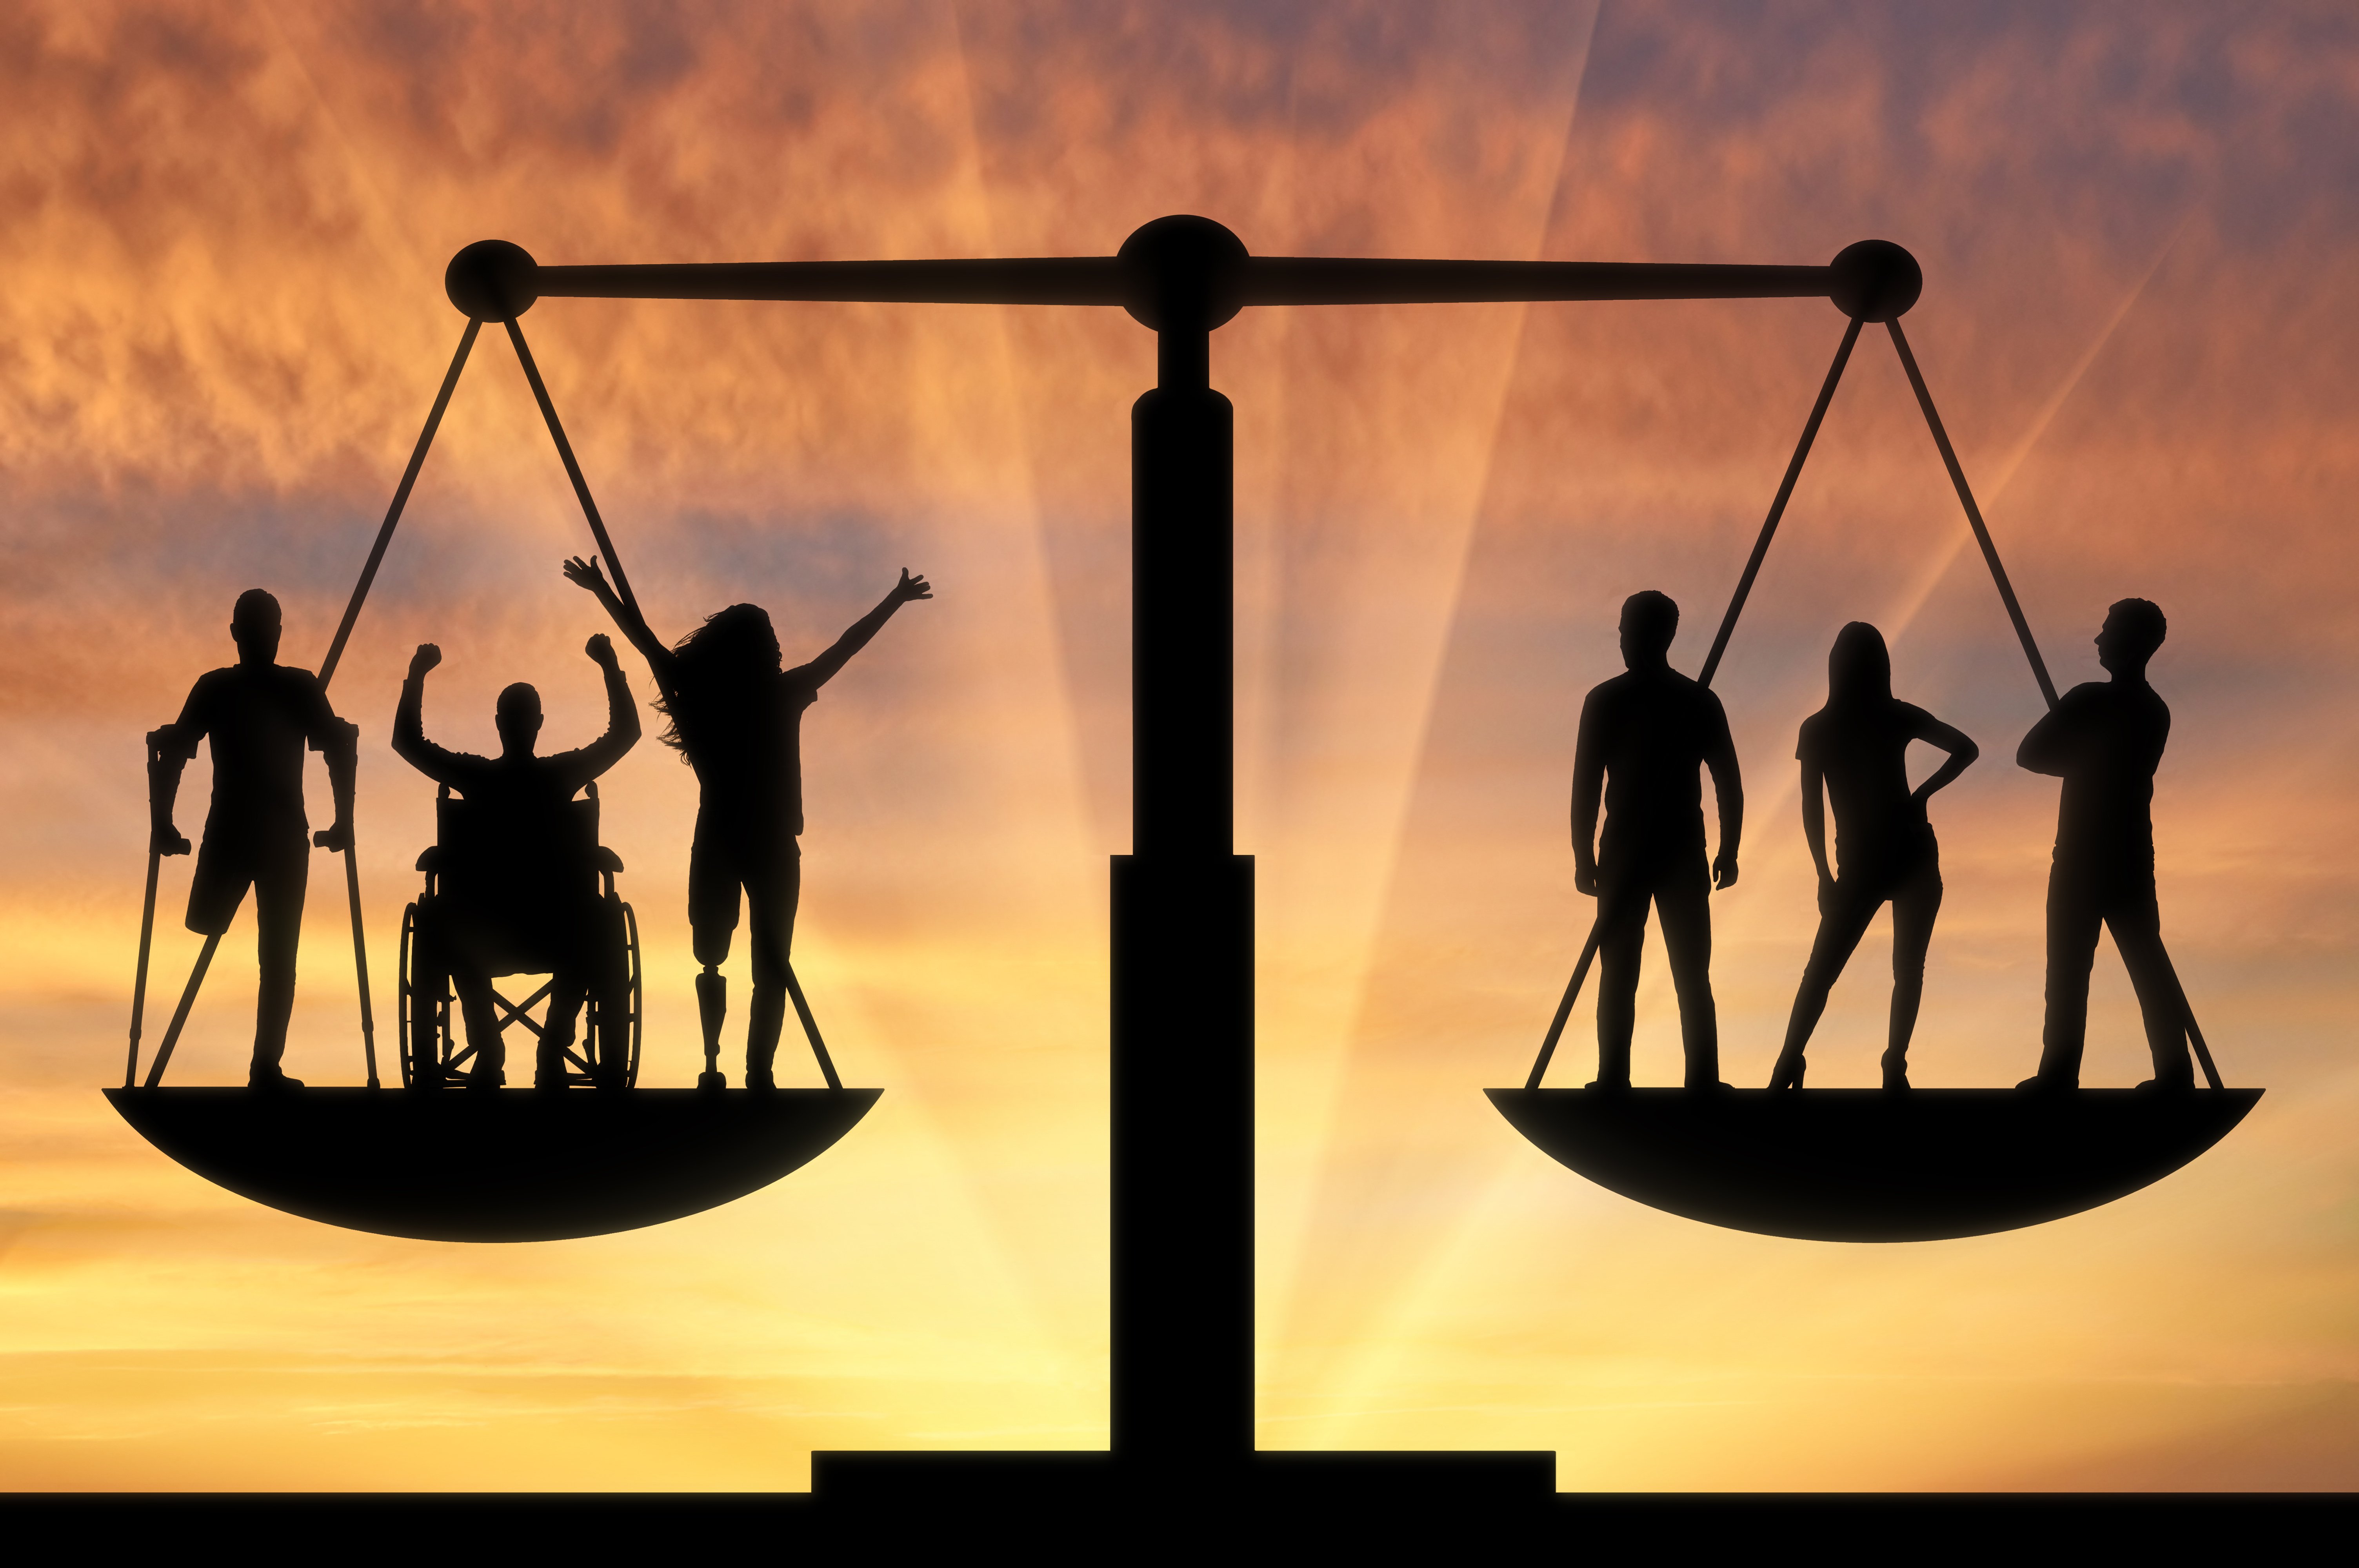 Balanced scales with one side having individuals with disabilities and the other side individuals without disabilities